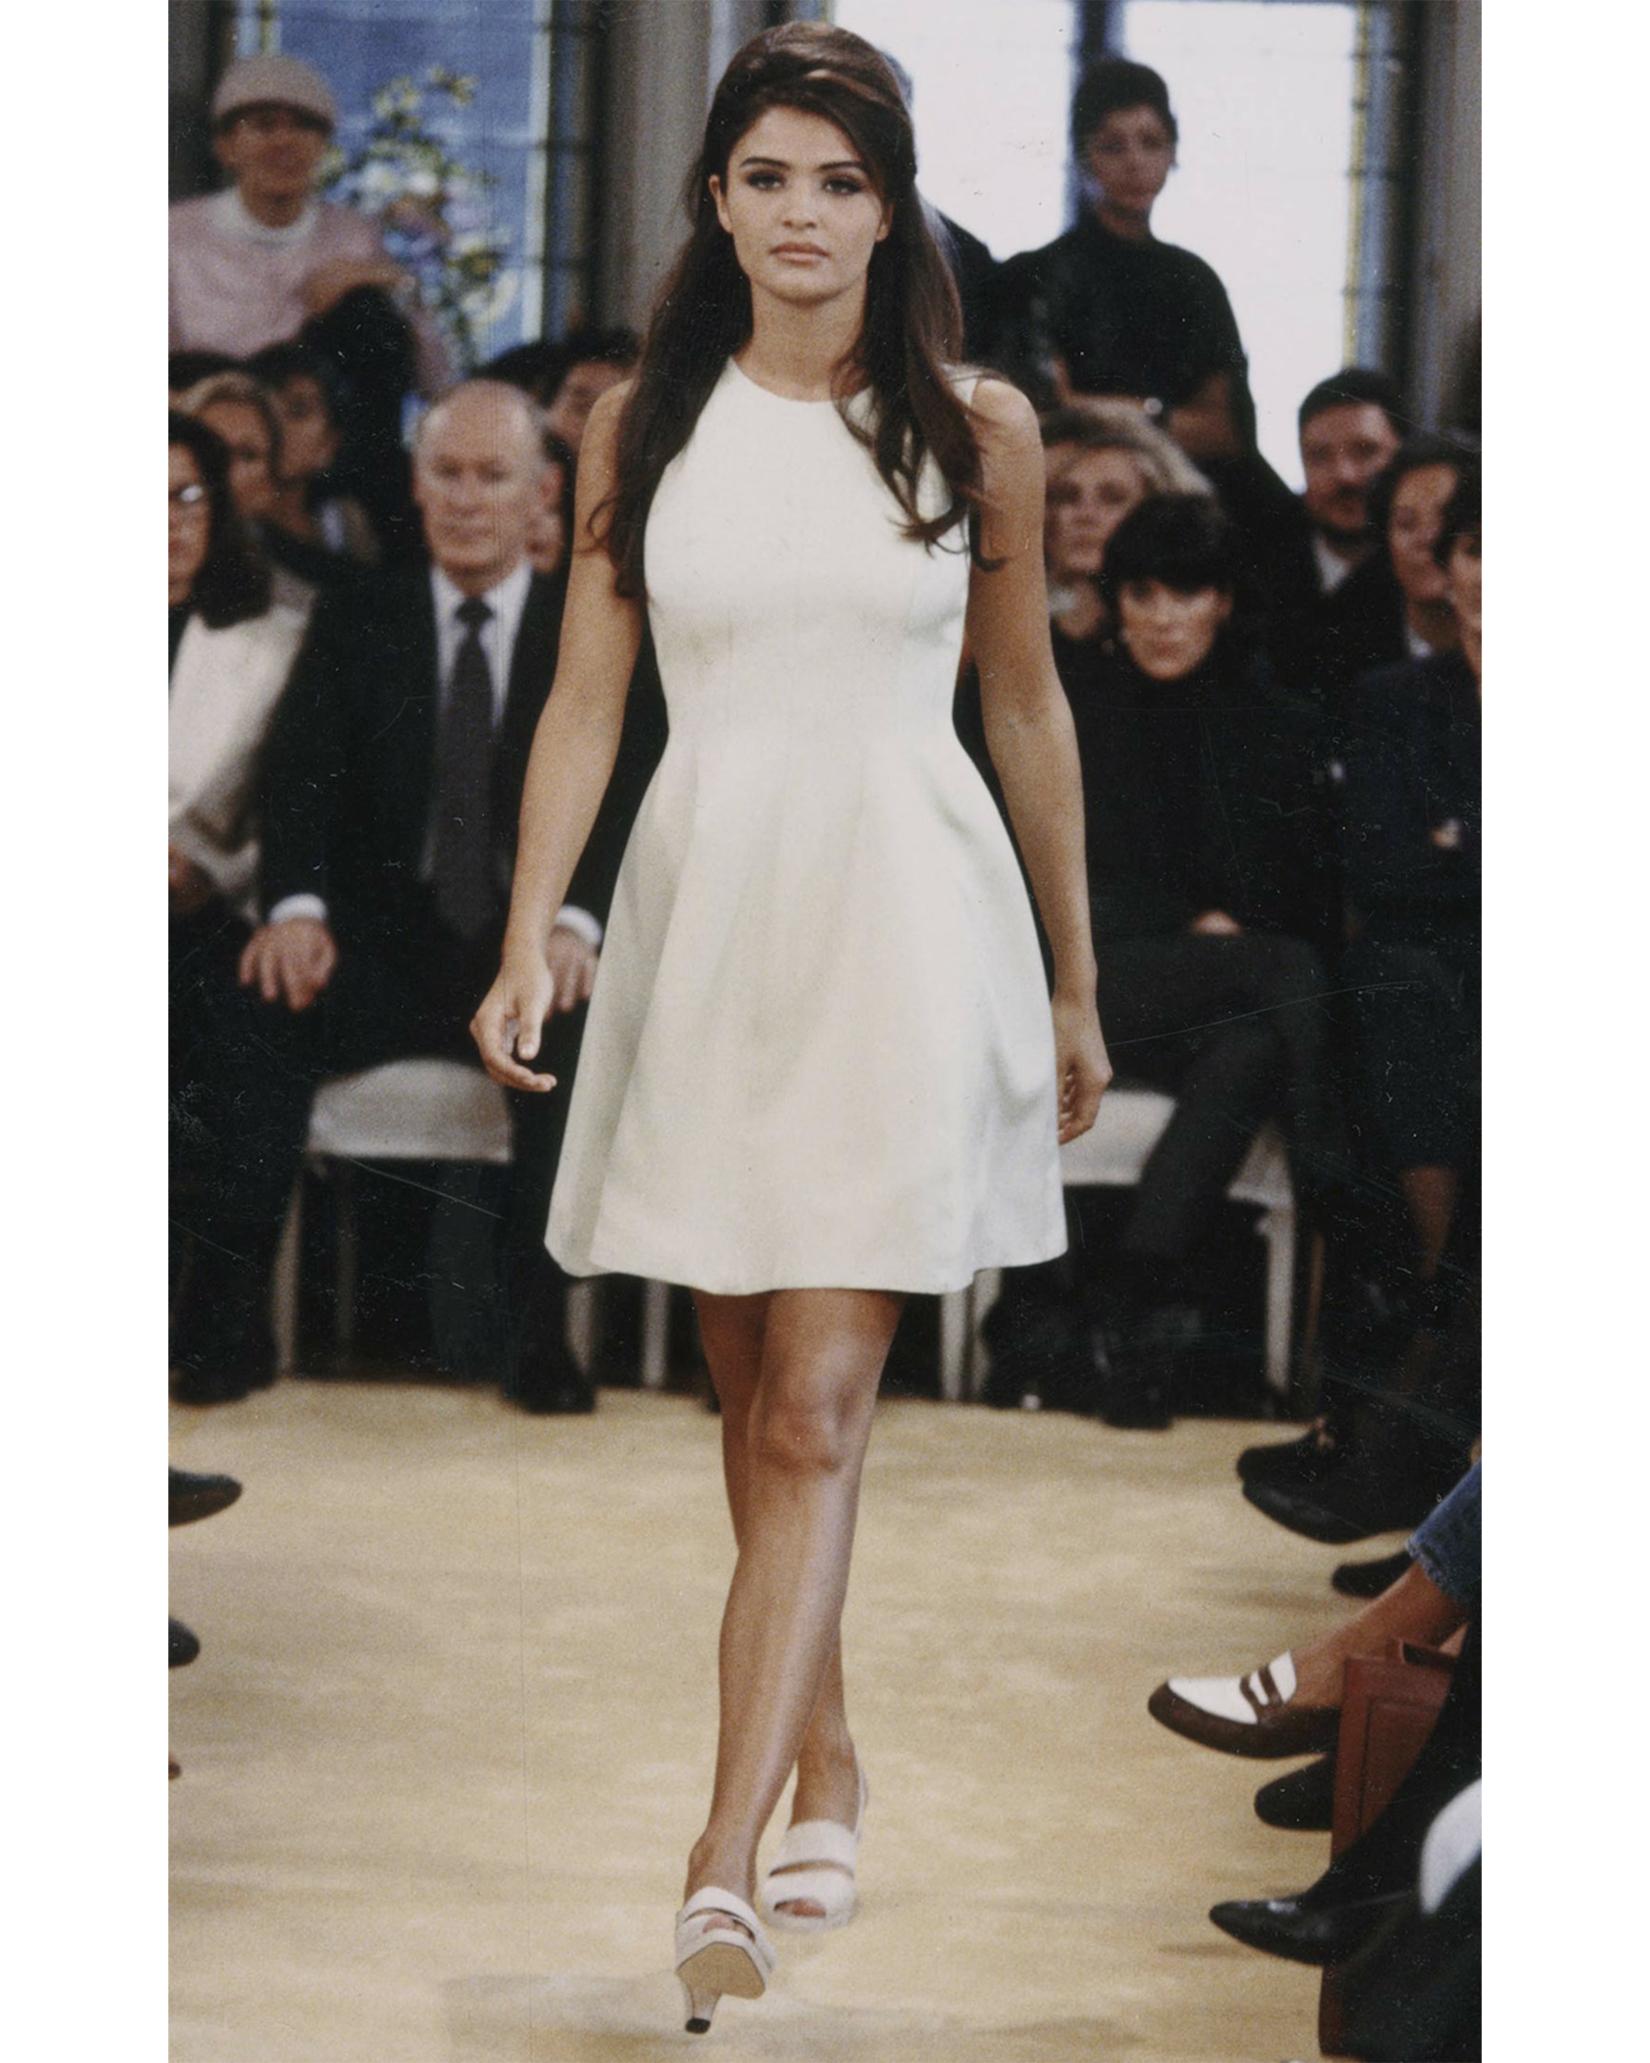 S/S 1992 Prada by Miuccia Prada muted beige scoop neck sleeveless mini dress. Trumpet silhouette with fitted waist and full skirt. Features visible curved seams at upper to create flattering silhouette at waist. Concealed back zip closure with tan